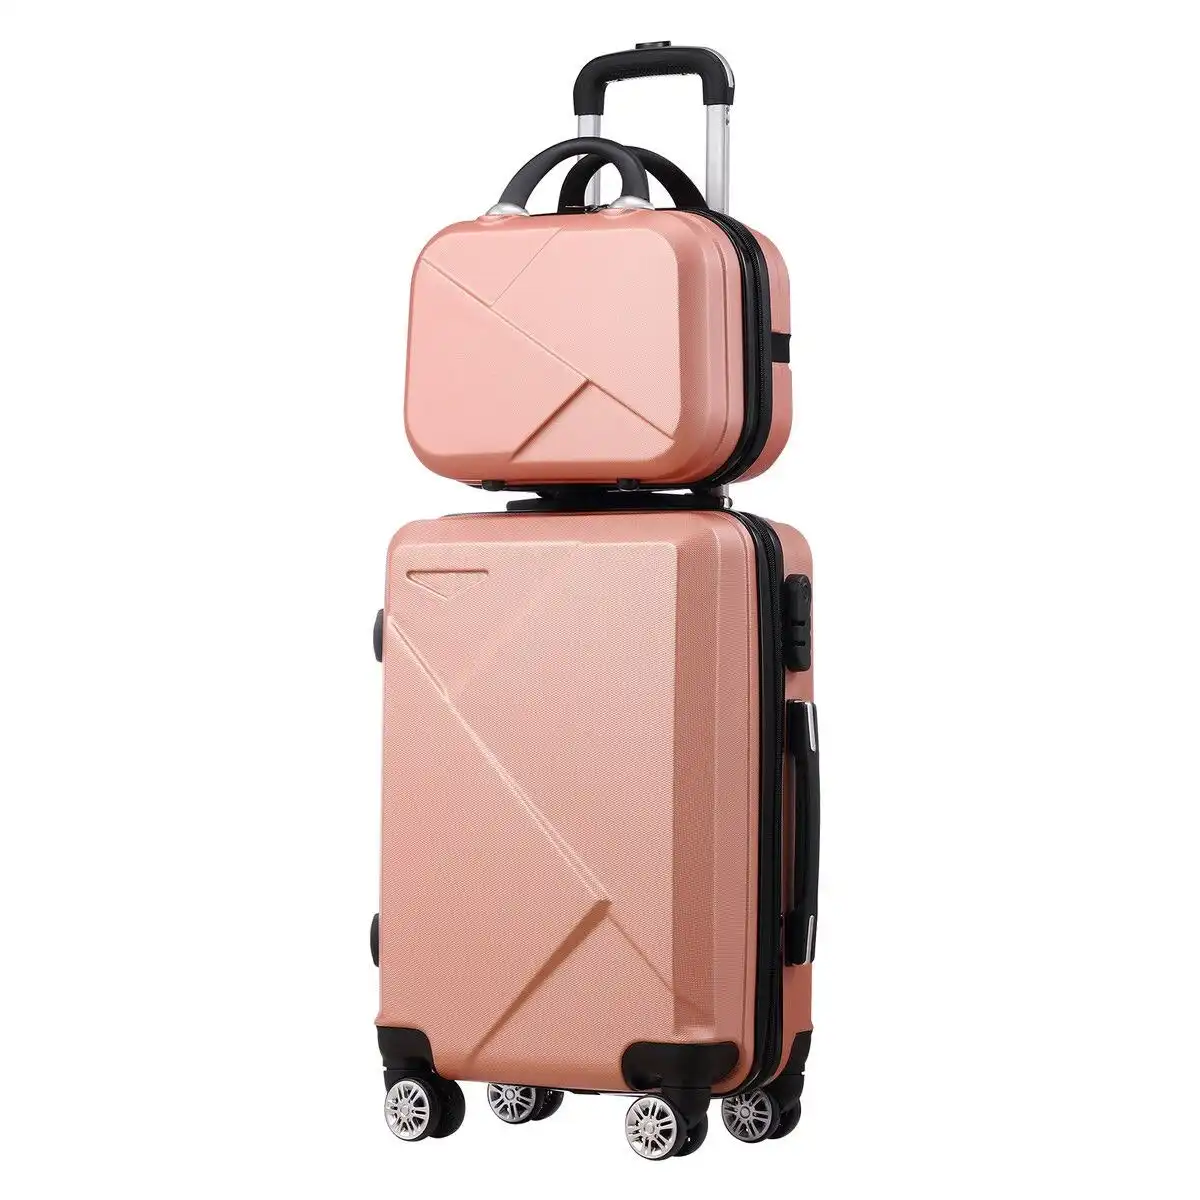 Ausway 2 Piece Luggage Set Travel Carry On Hard Shell Suitcases Traveller Rolling Travelling Checked Trolley Vanity Bag Lightweight